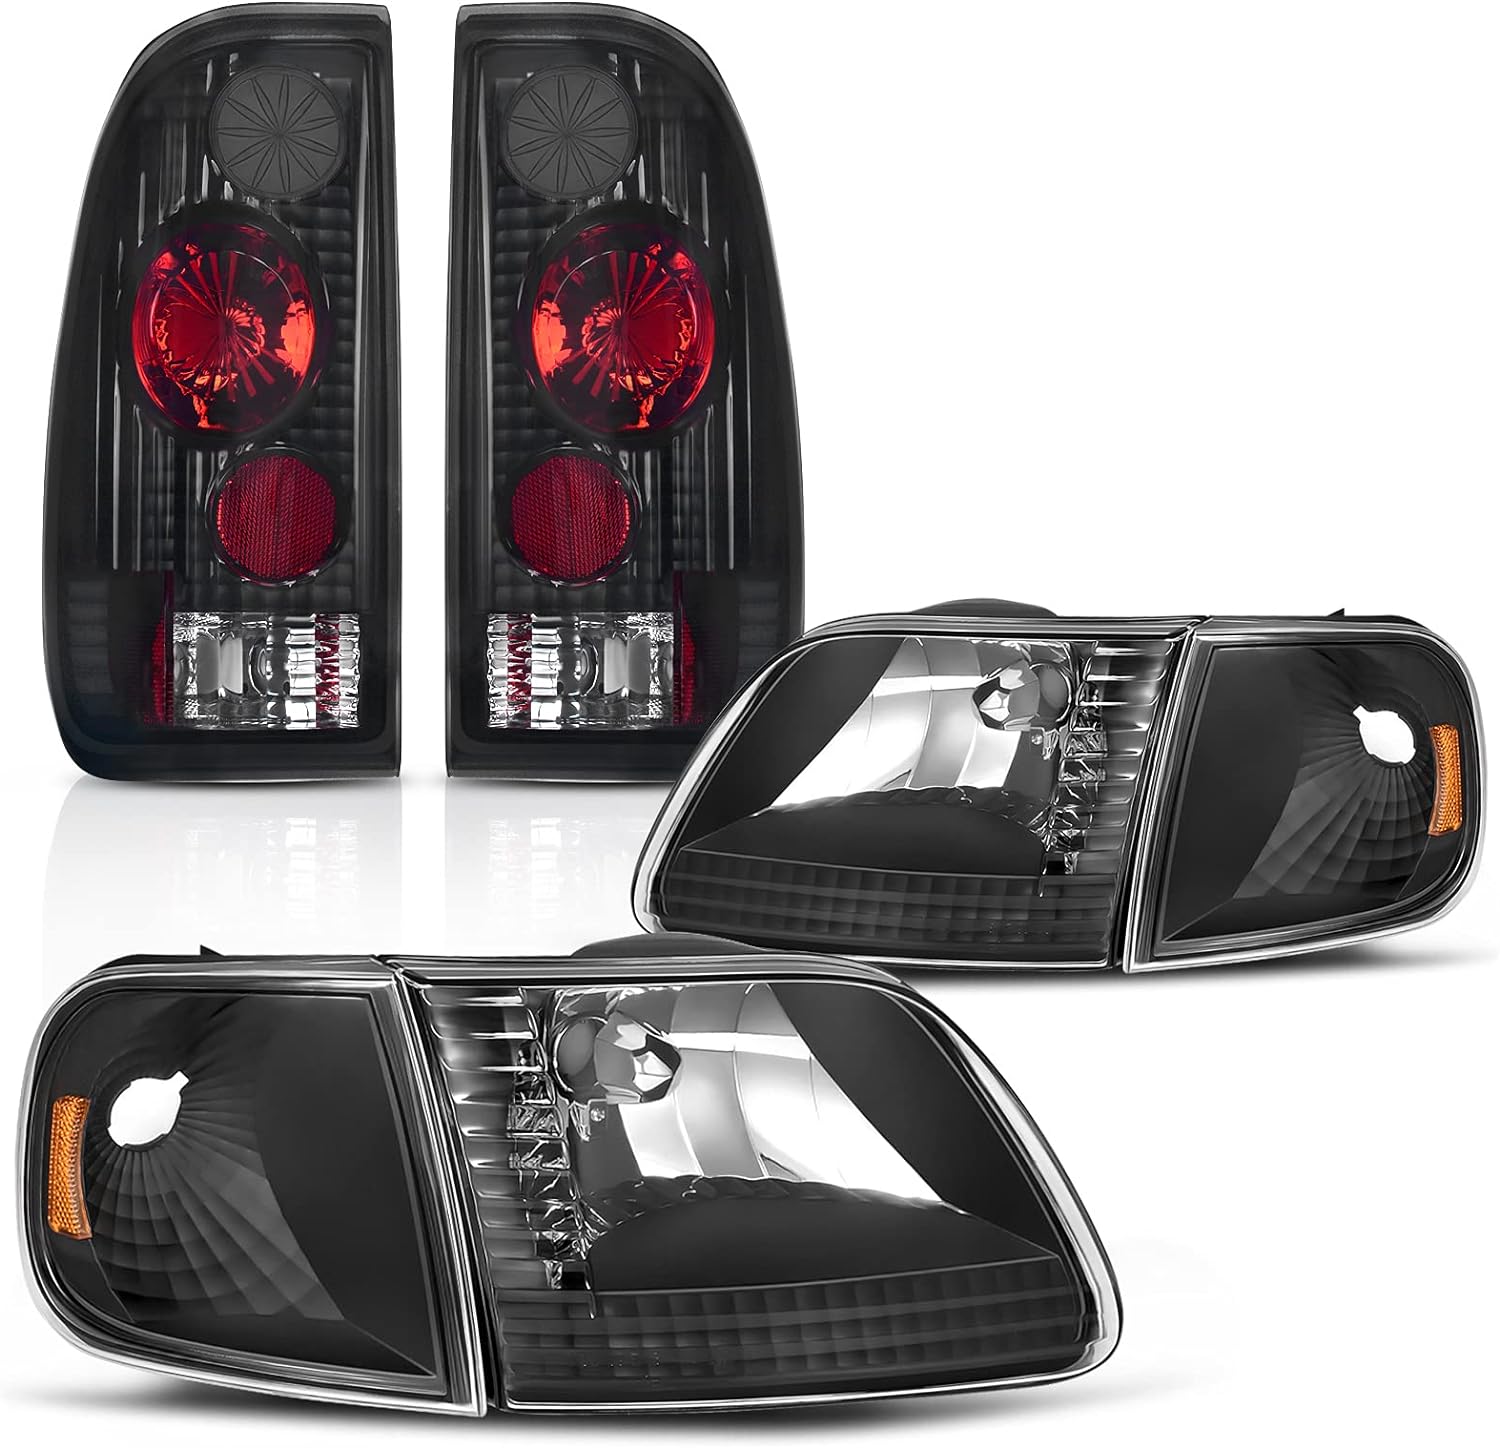 DWVO Headlights Tail Lights Assembly Compatible with Ford F-150 1997 1998 1999 2000 2001 2002 2003 2004 Black Housing Headlights + Smoke Lens Taillights Combo (Does Not Fit Supercrew Models)